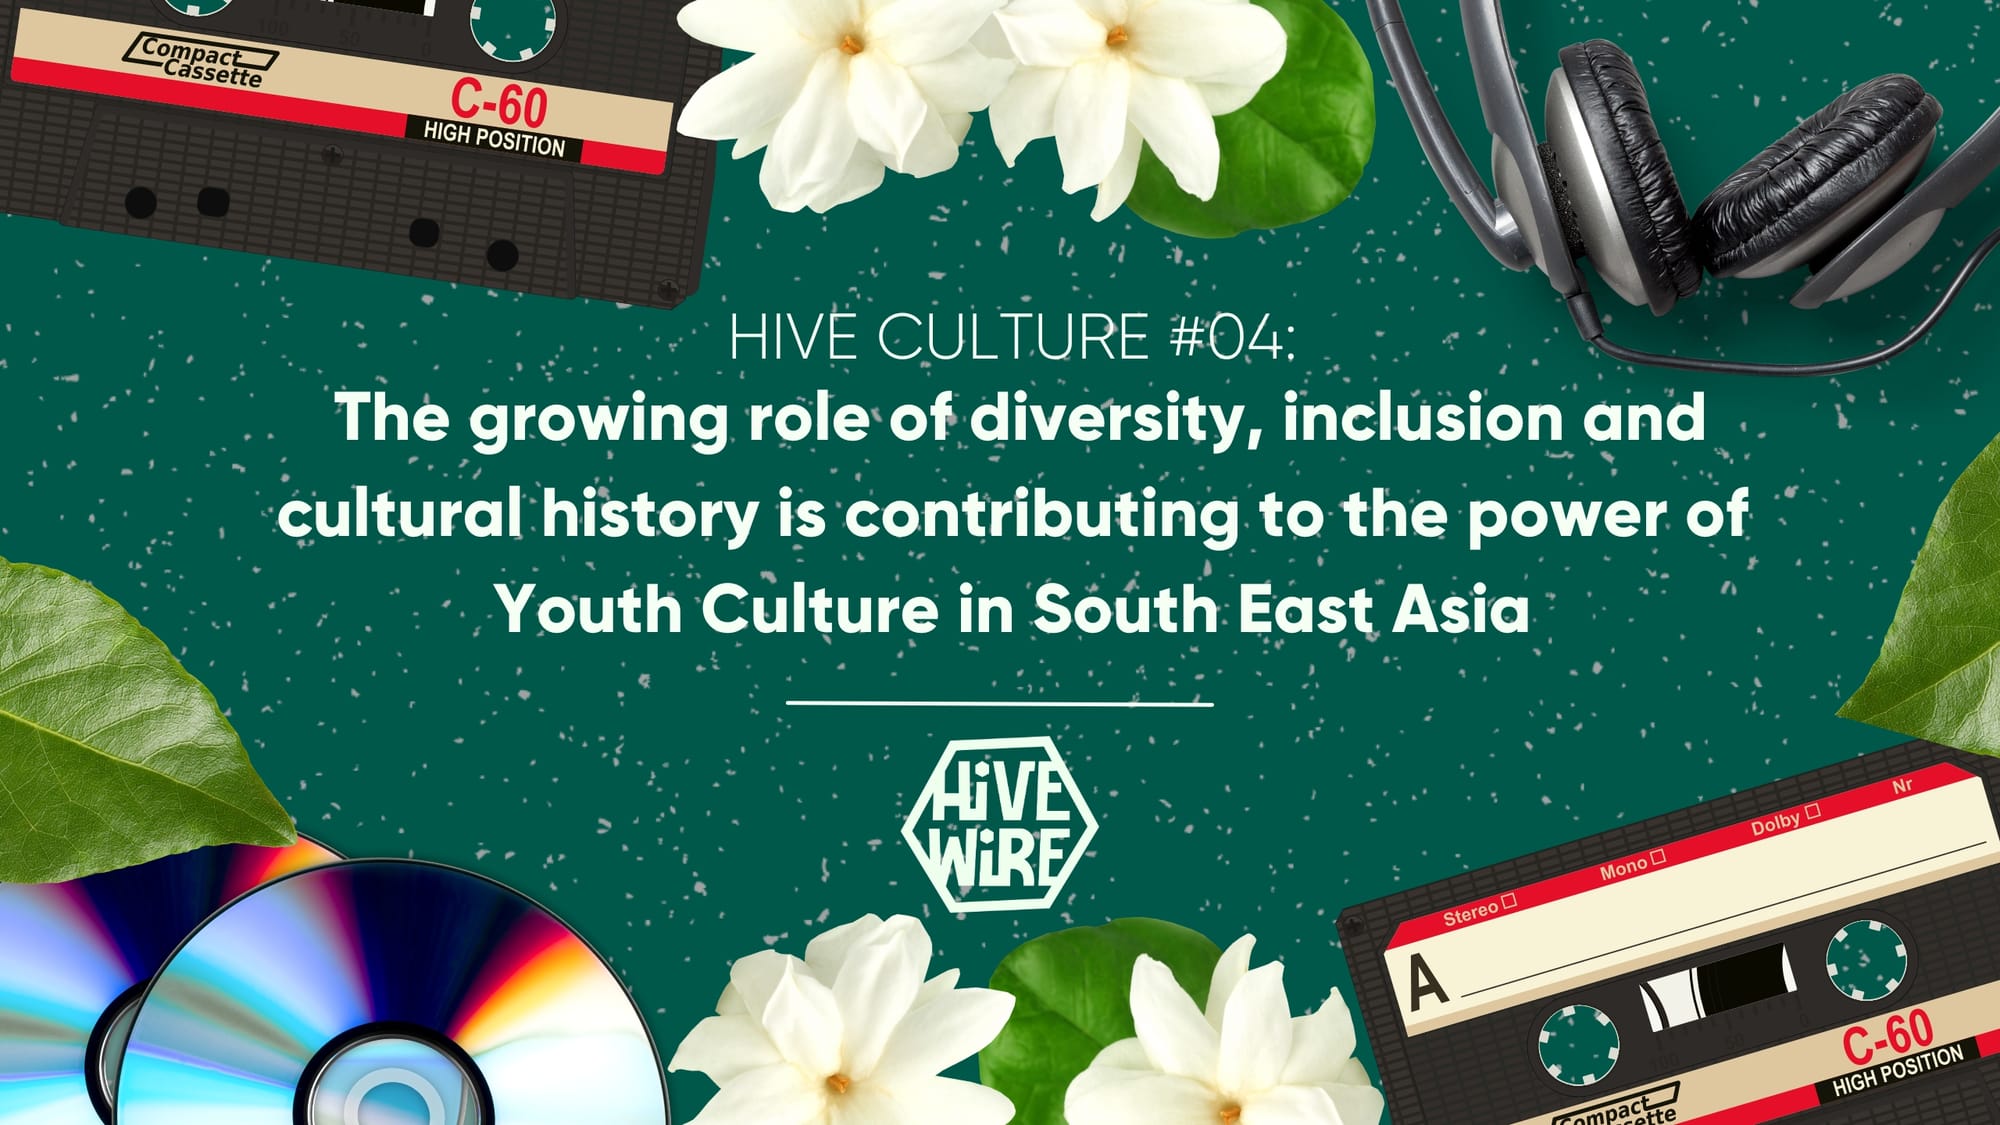 HIVE CULTURE #04 - The growing role of diversity, inclusion and cultural history is contributing to the power of Youth Culture in South East Asia